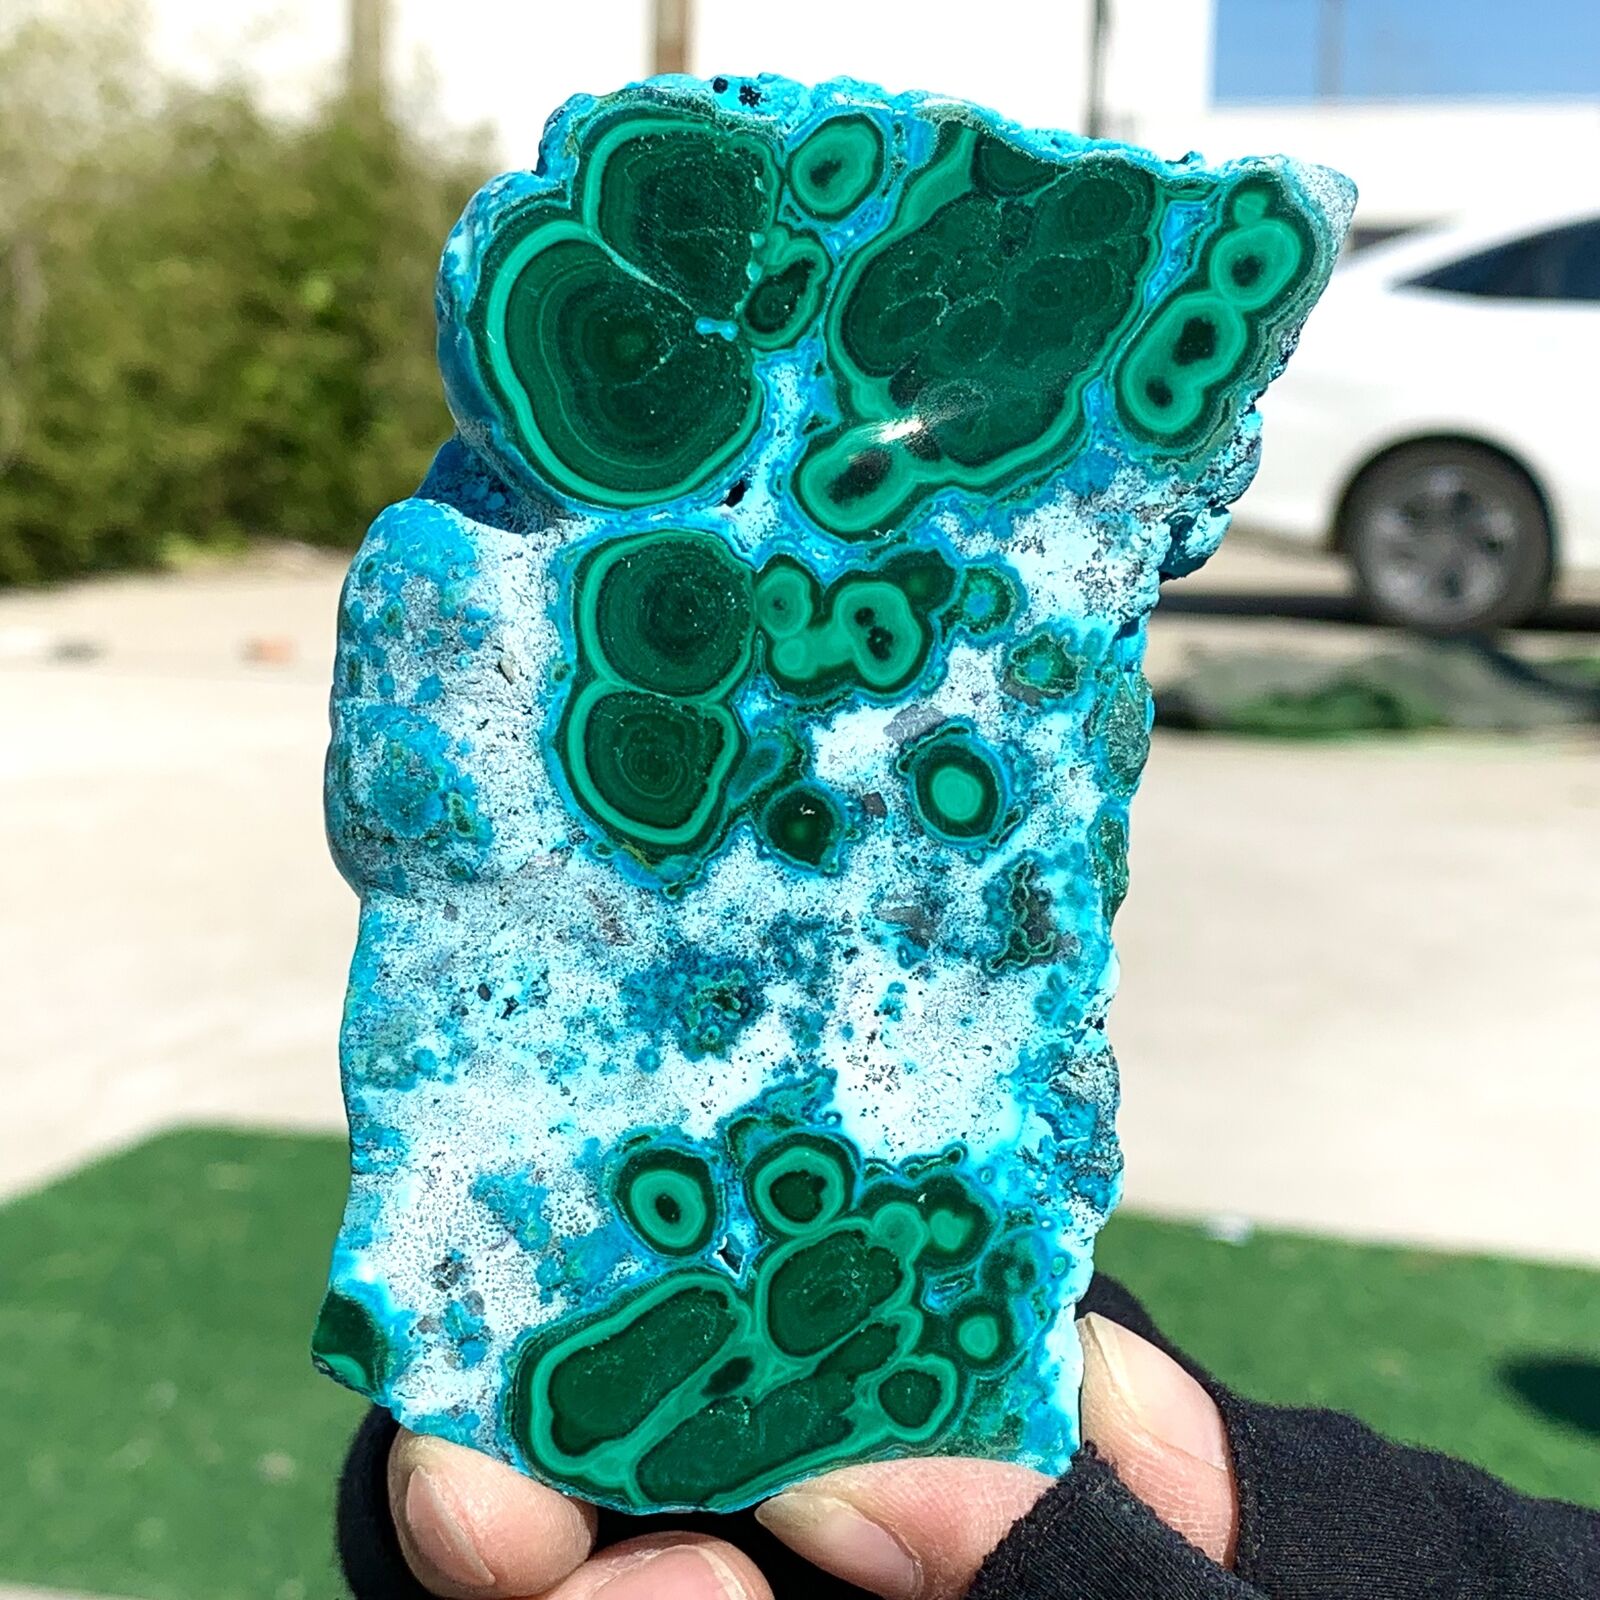 252G Natural Chrysocolla/Malachite transparent cluster rough mineral sample